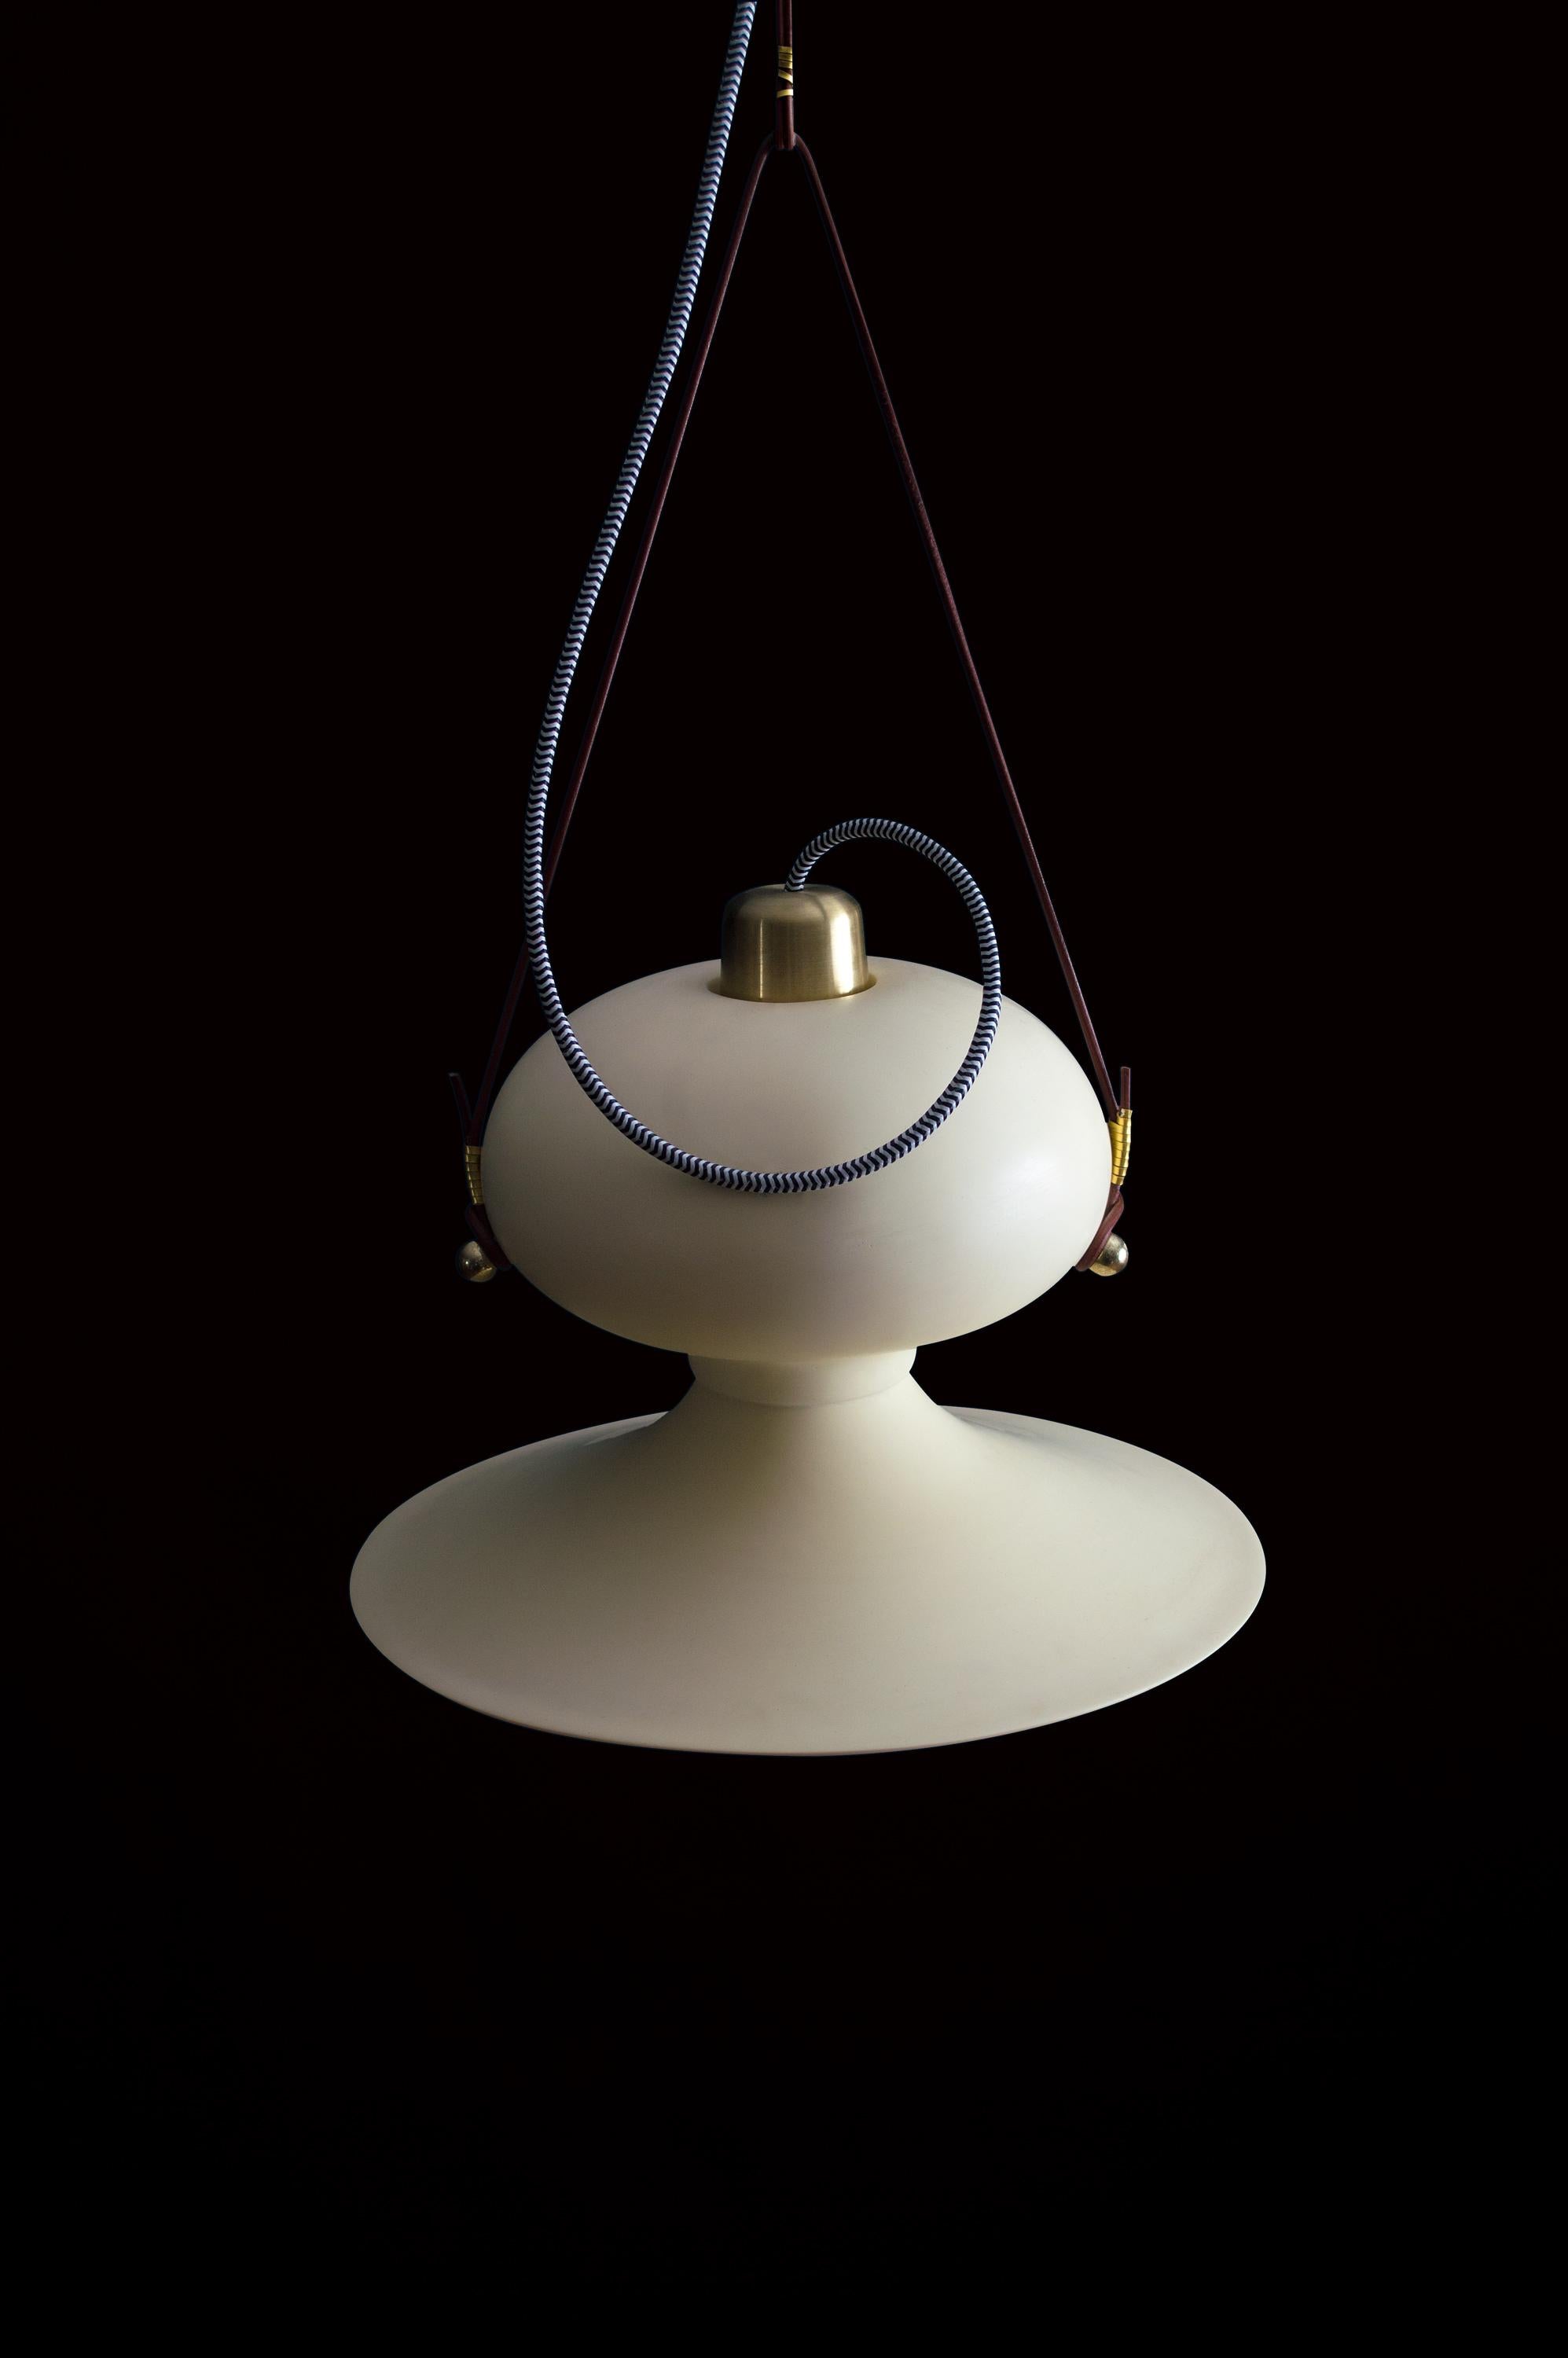 OVOIDE N.° 3 pendant by Acoocooro
Dimensions: Ø 40 x H 26 cm, leather cord length made to order.
Materials: Hand-cast resin sculptural pendant, brass accents, and round leather cord.

All our lamps can be wired according to each country. If sold to